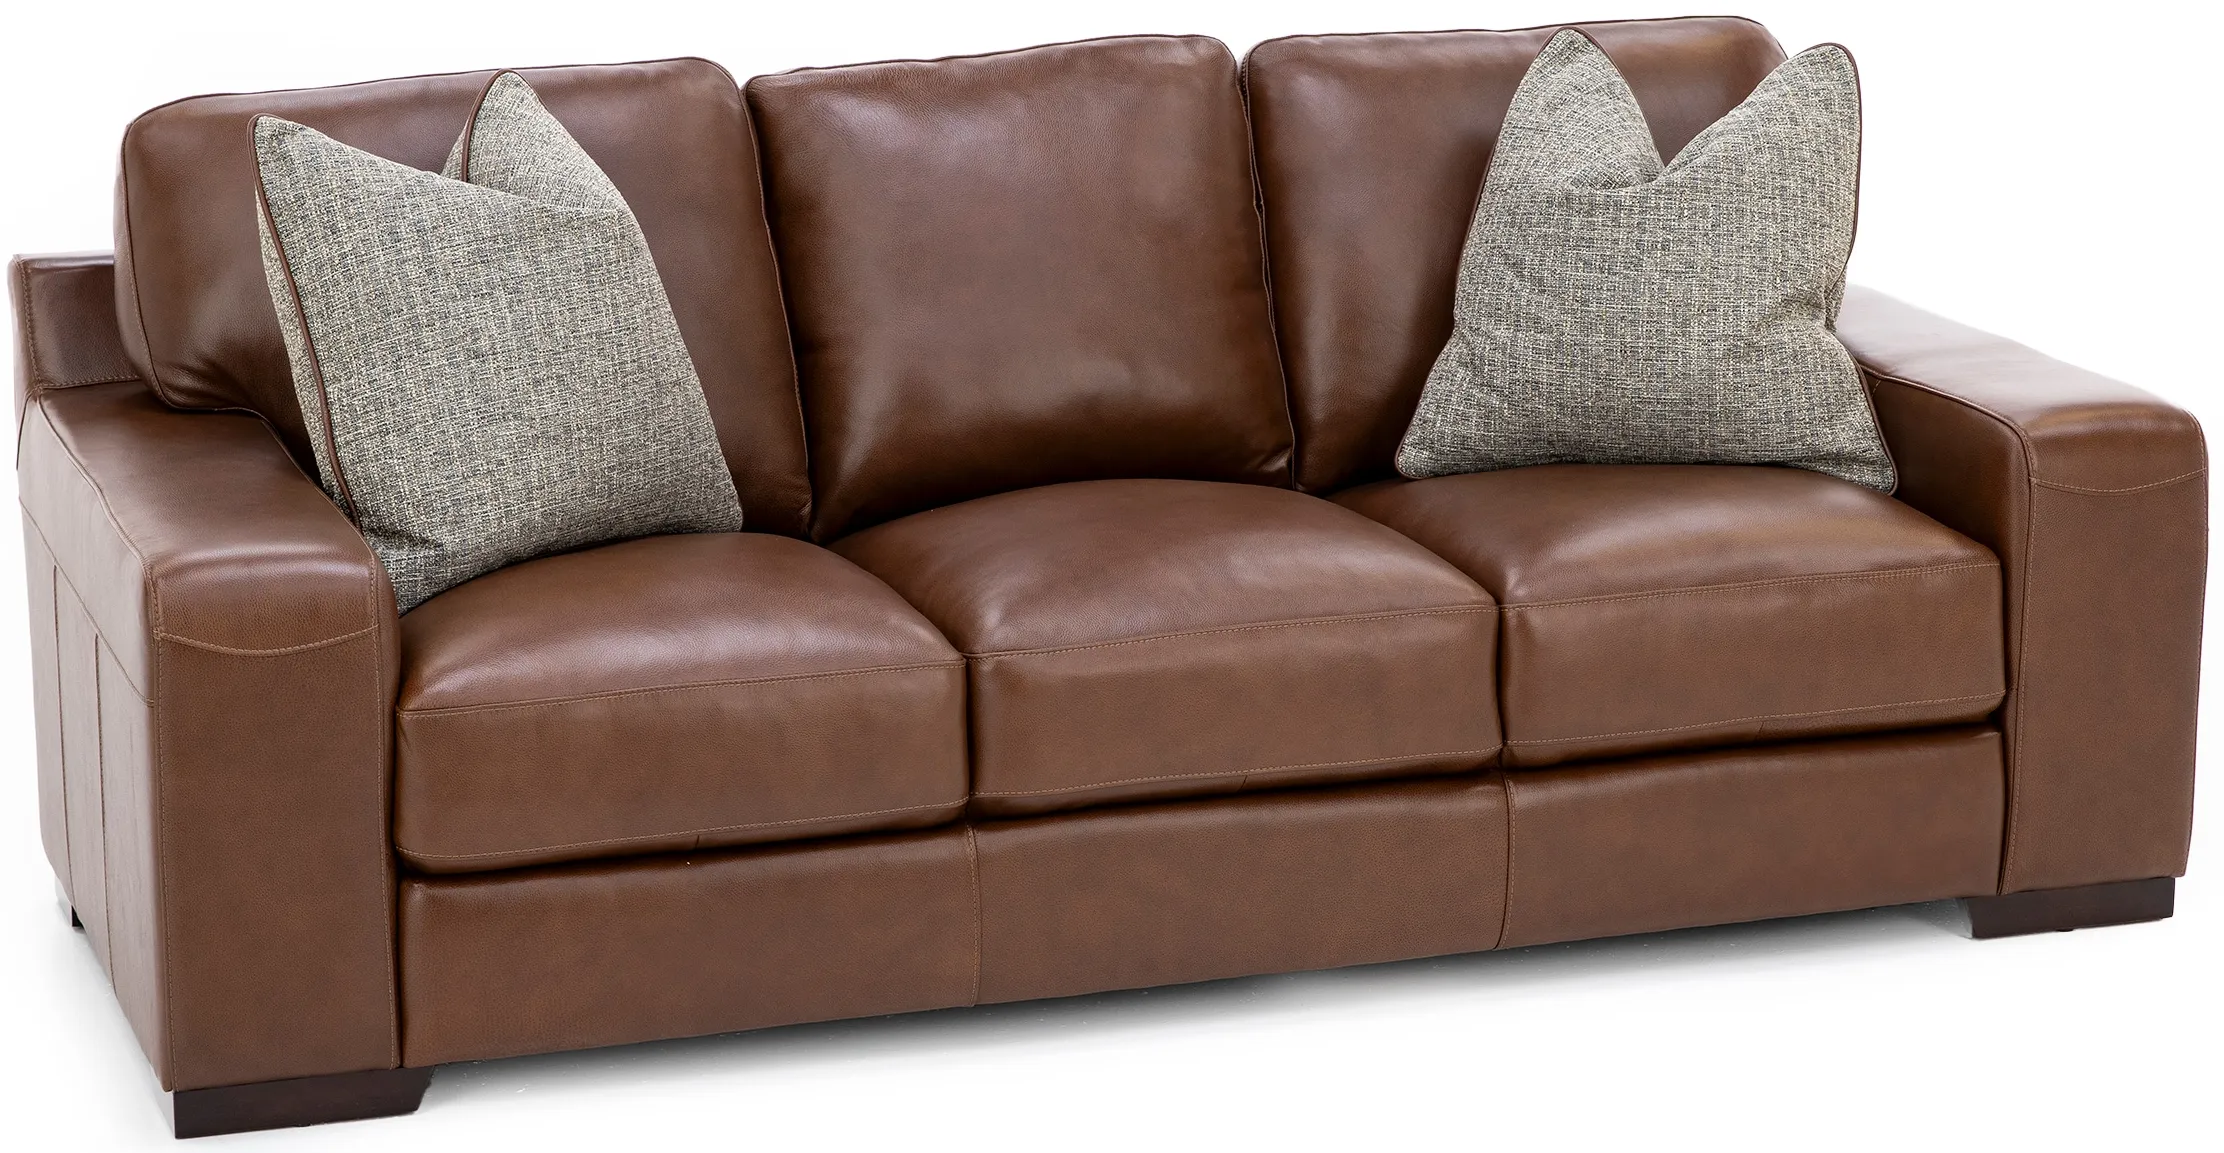 Everest Leather Sofa With Wireless Charging in Chestnut